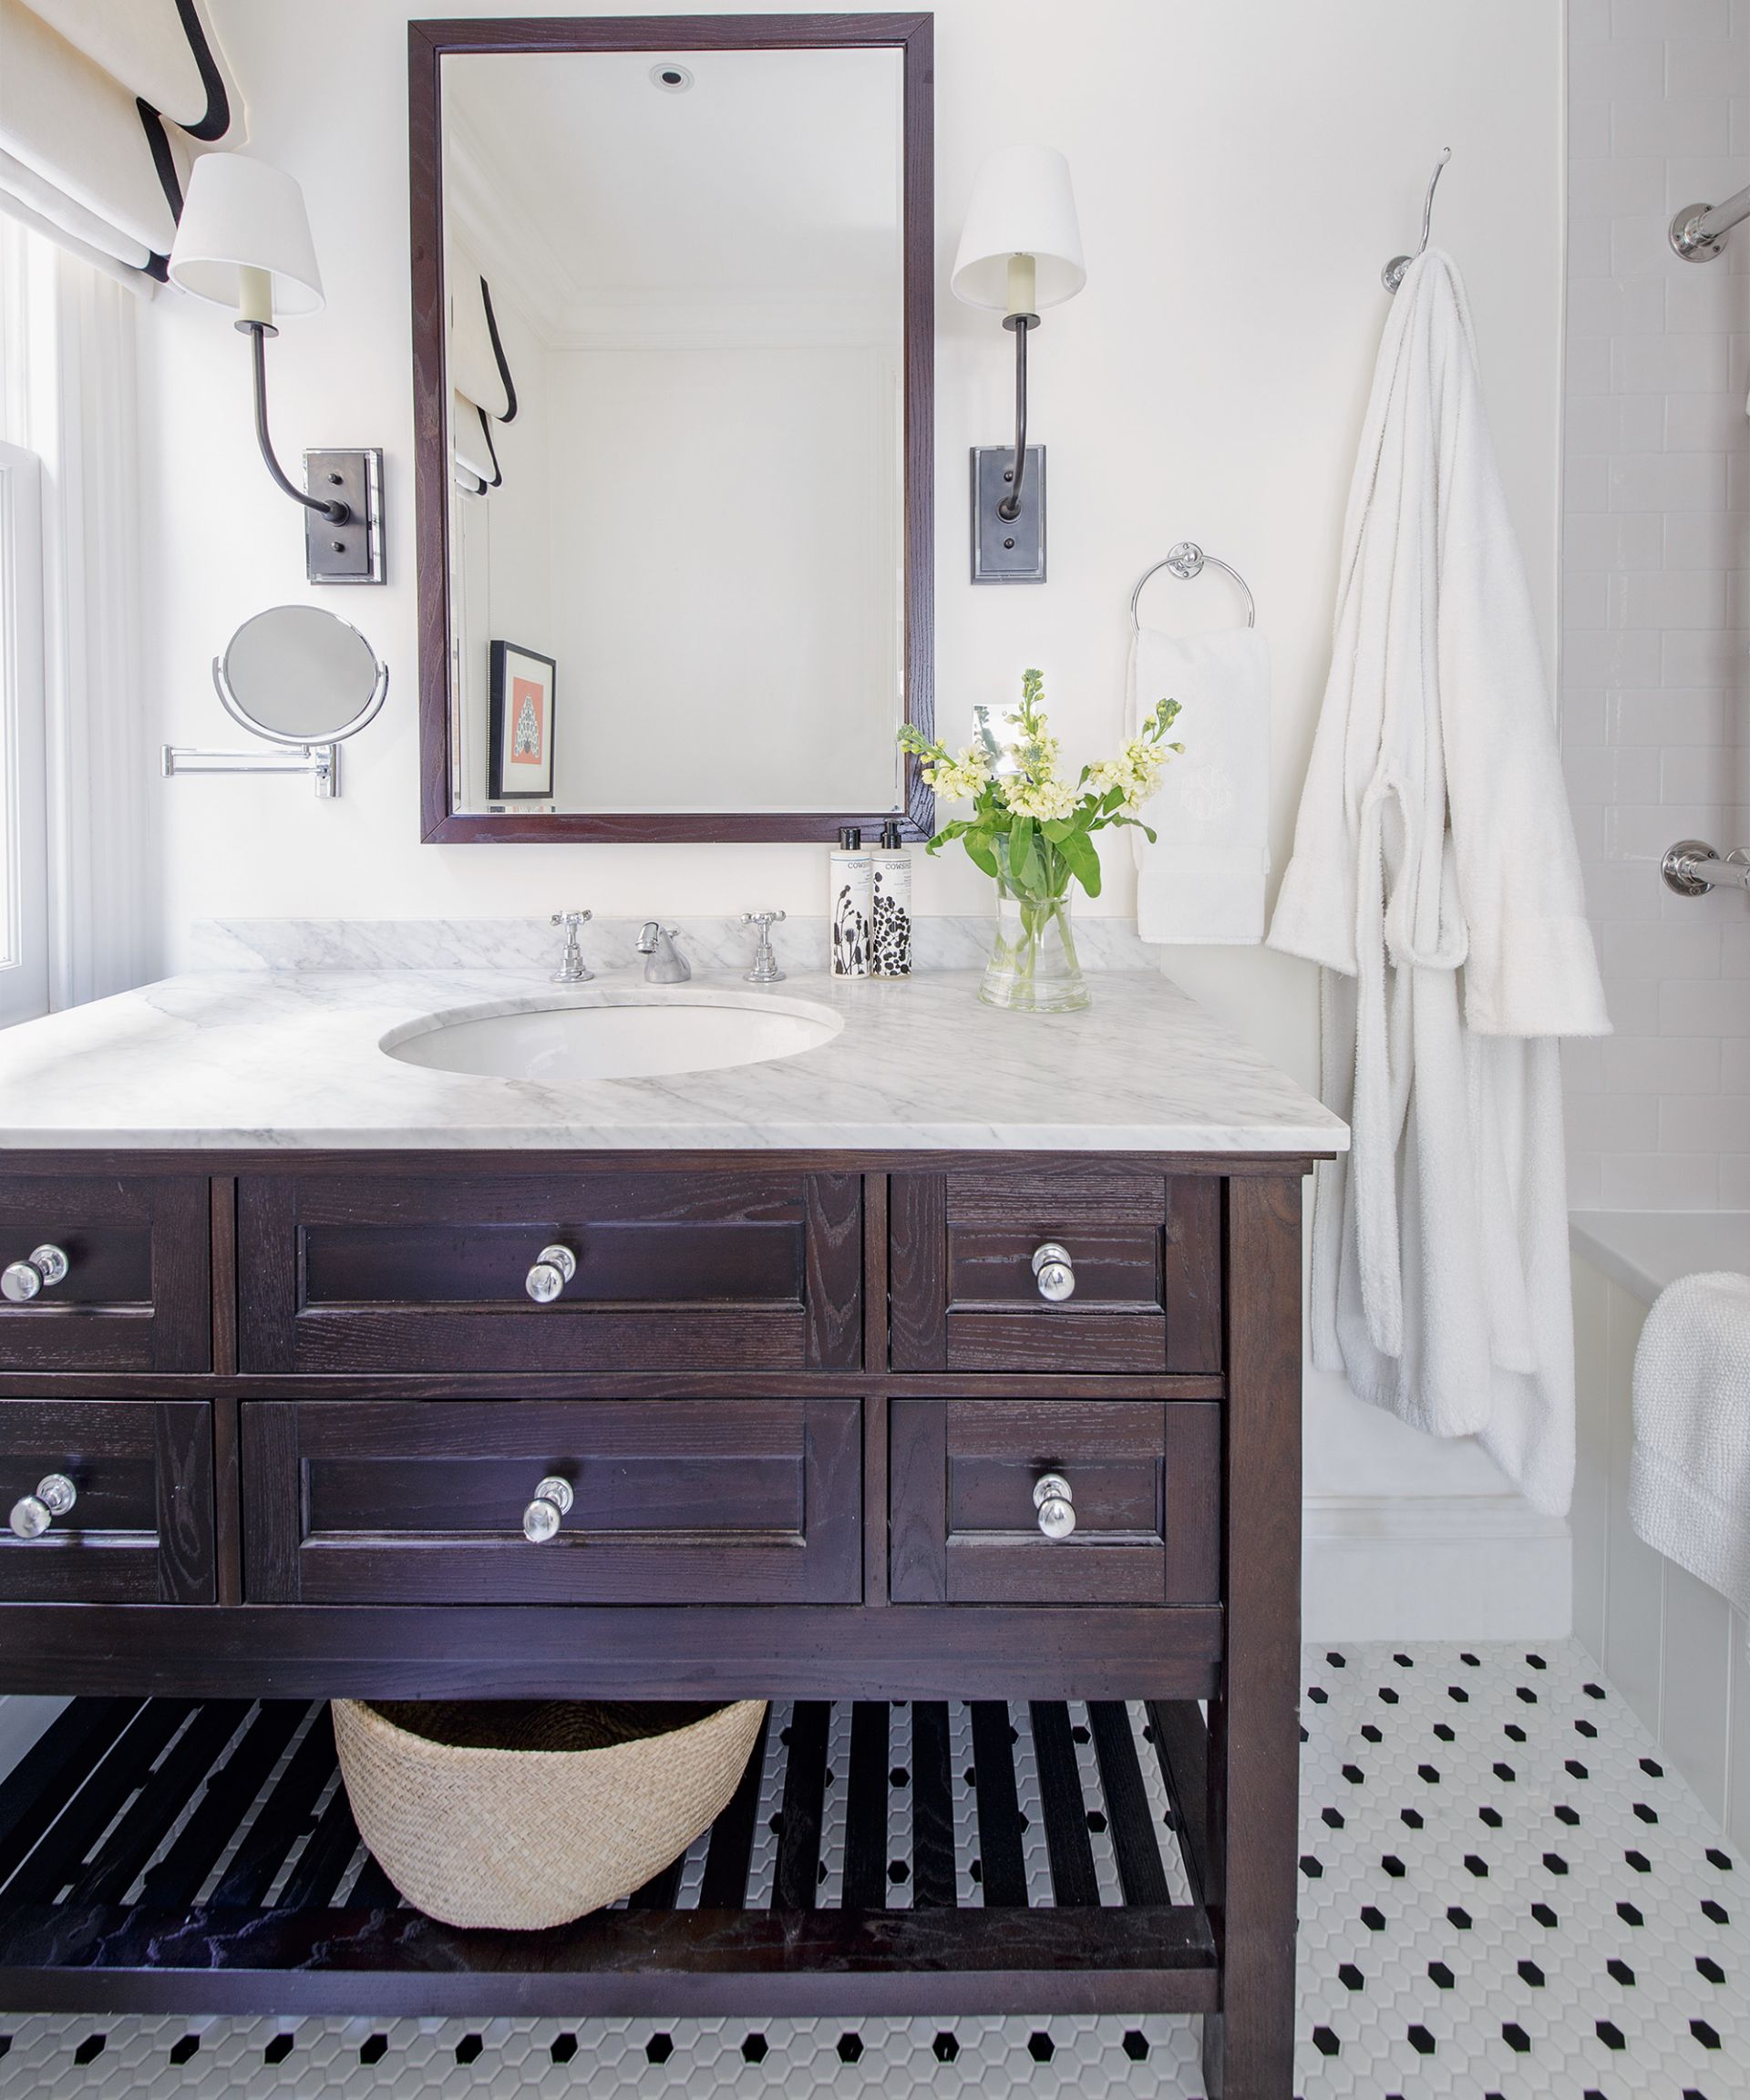 <p>                     Don’t shy away from making a big statement in a small bathroom. Striking furniture will make an impact and hard-working pieces that conceal storage or double up on function will maximize your home’s efficiency.                    </p>                                      <p>                     Natalia Miyar, design director at Helen Green, suggests a bold approach.                    </p>                                      <p>                     ‘Proportion is so important. I like to use large-scale furniture as it makes a space seem bigger and more luxurious,’ she says. ‘The key is to choose carefully. Buy a few large, impactful pieces rather than cluttering a space with a lot of small items.’                    </p>                                      <p>                     Bespoke or standalone shelving is a simple way of creating storage, as well as acting as a room divider. Open bathroom shelves can also inject a sense of spaciousness in compact spaces.                    </p>